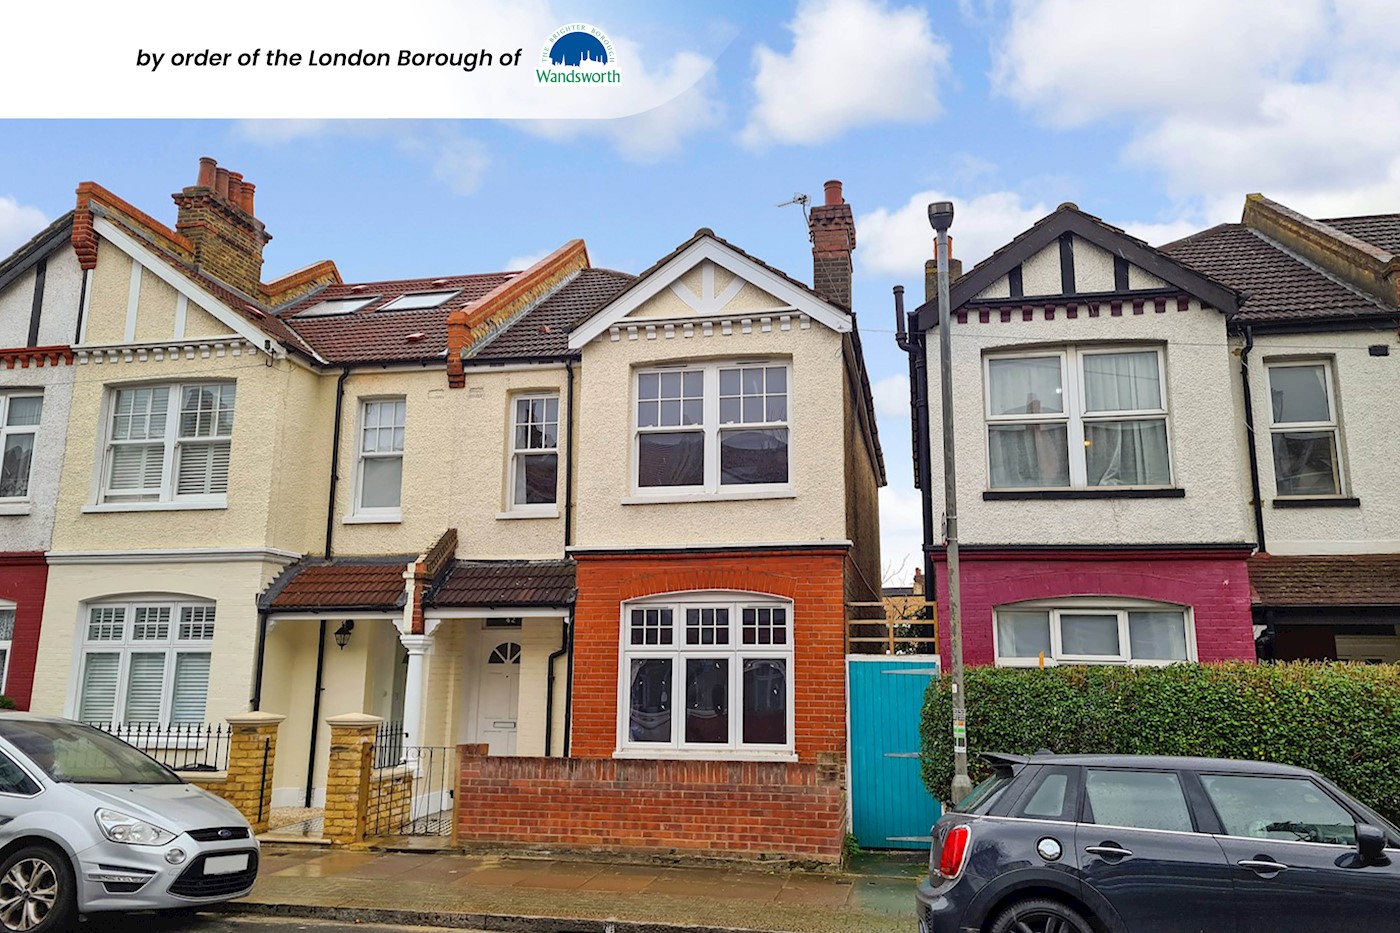 42 Ashvale Road, Tooting, SW17 8PW 1/10